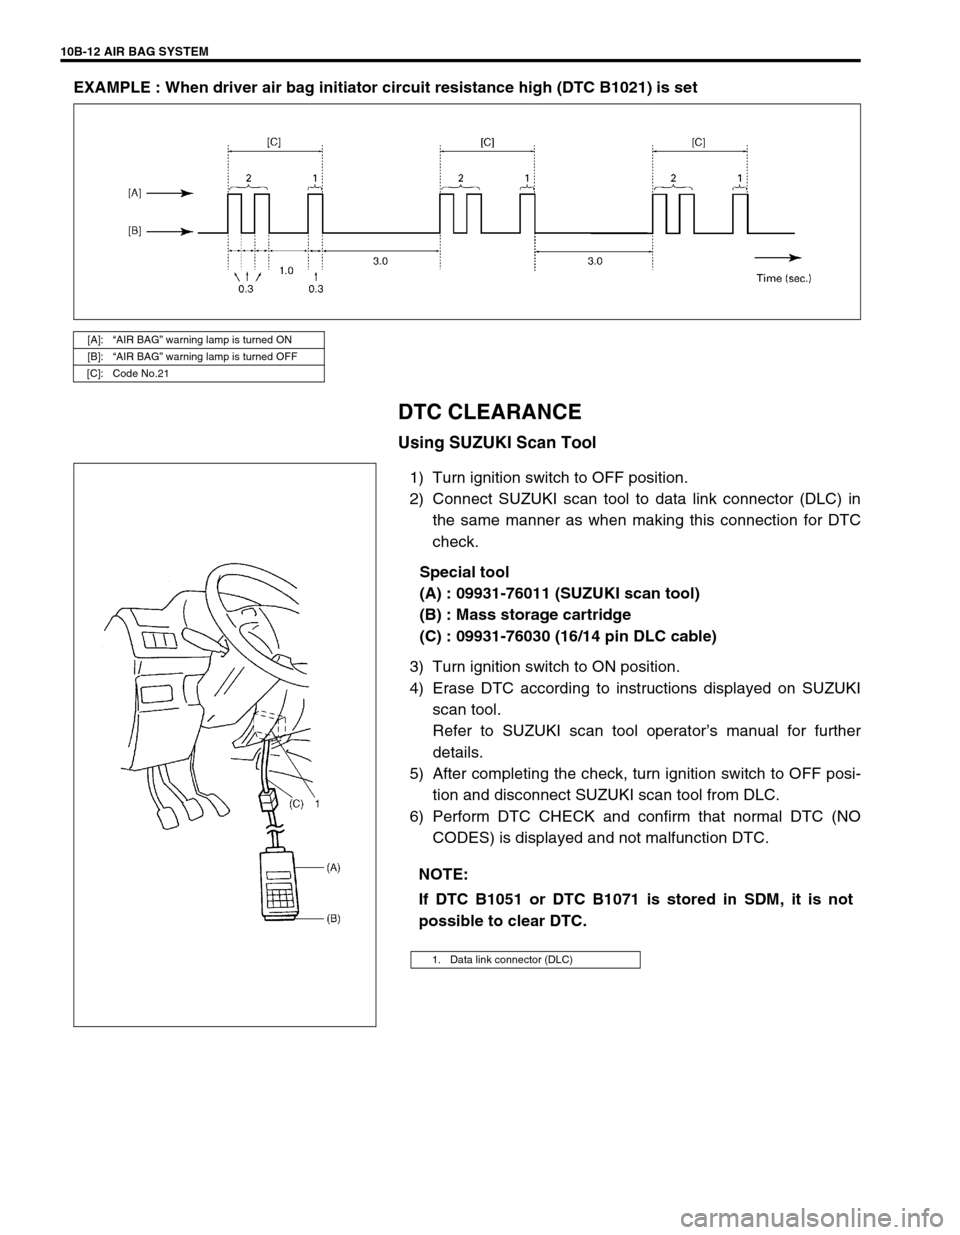 SUZUKI SWIFT 2000 1.G Transmission Service Workshop Manual 10B-12 AIR BAG SYSTEM
EXAMPLE : When driver air bag initiator circuit resistance high (DTC B1021) is set
DTC CLEARANCE
Using SUZUKI Scan Tool
1) Turn ignition switch to OFF position.
2) Connect SUZUKI